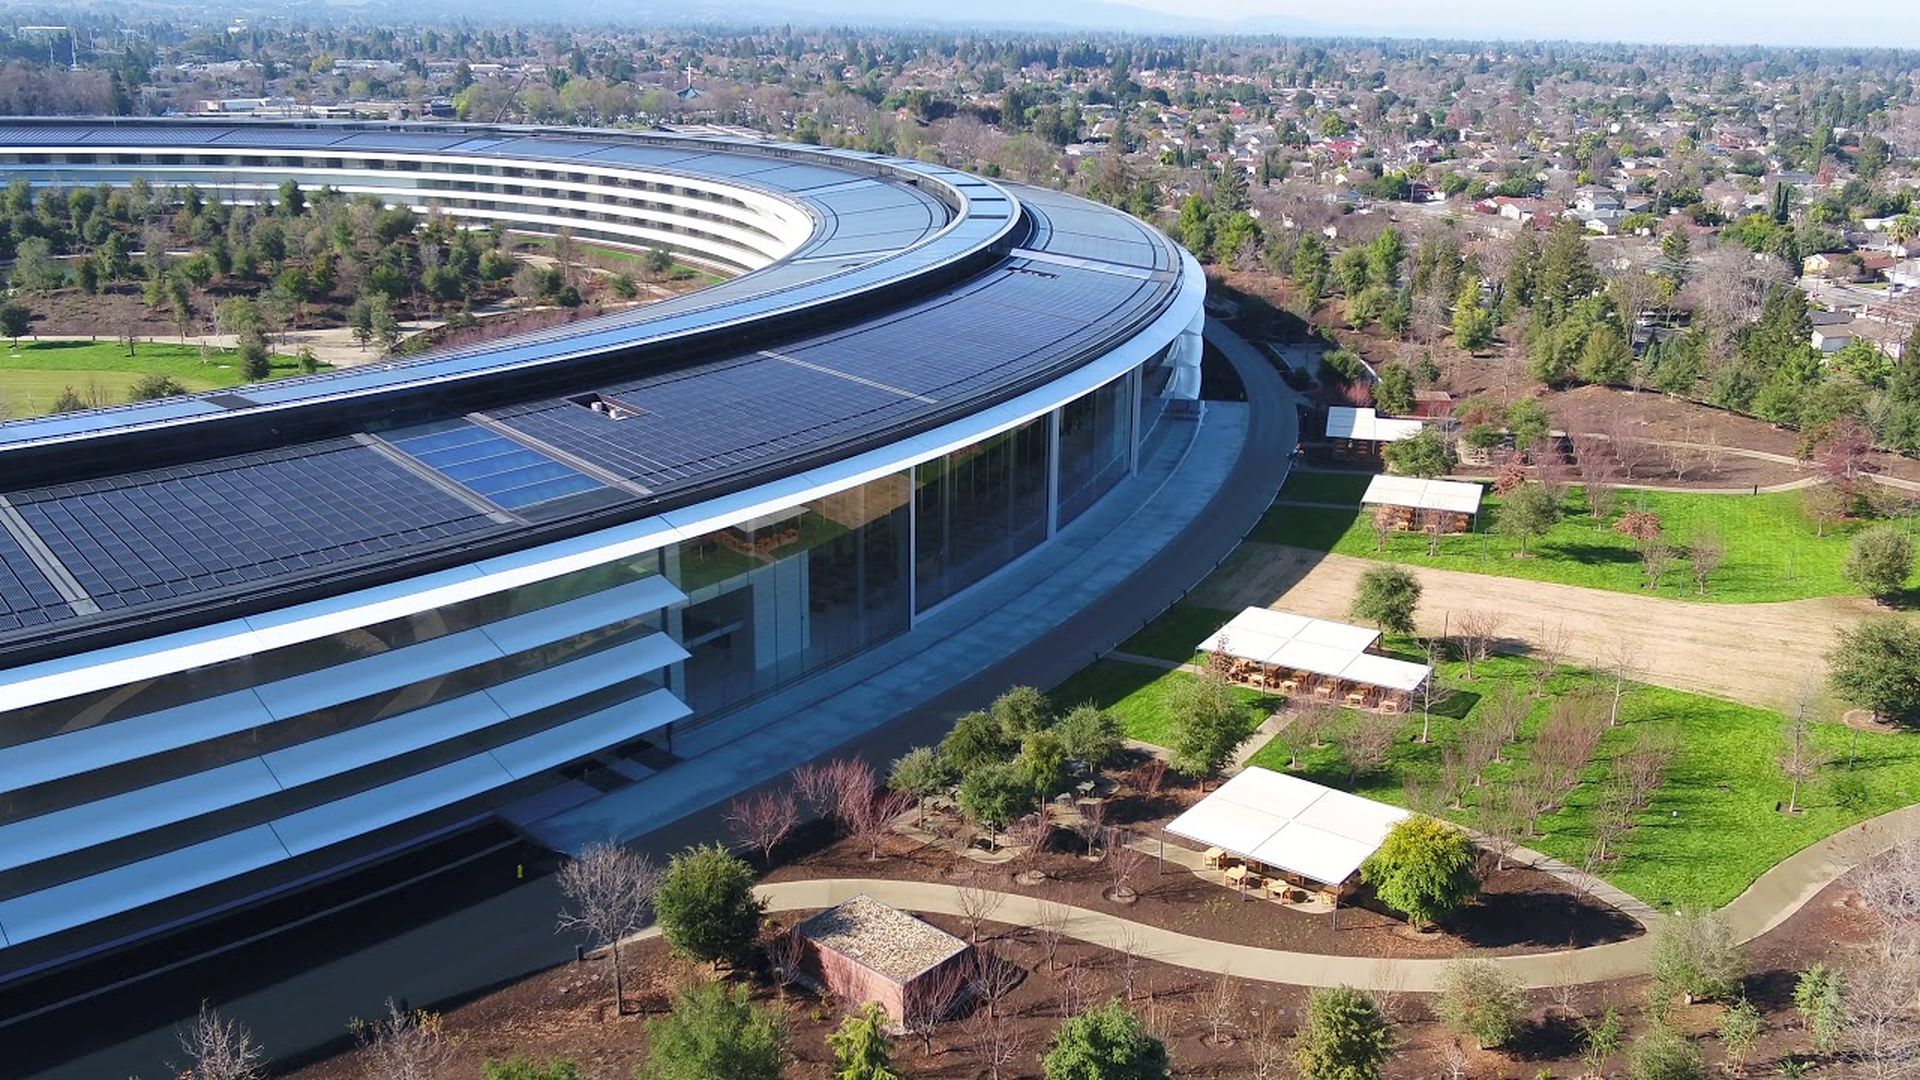 In this article, we are going to be covering the new Apple San Diego campus site that was acquired by the company for $445 million.